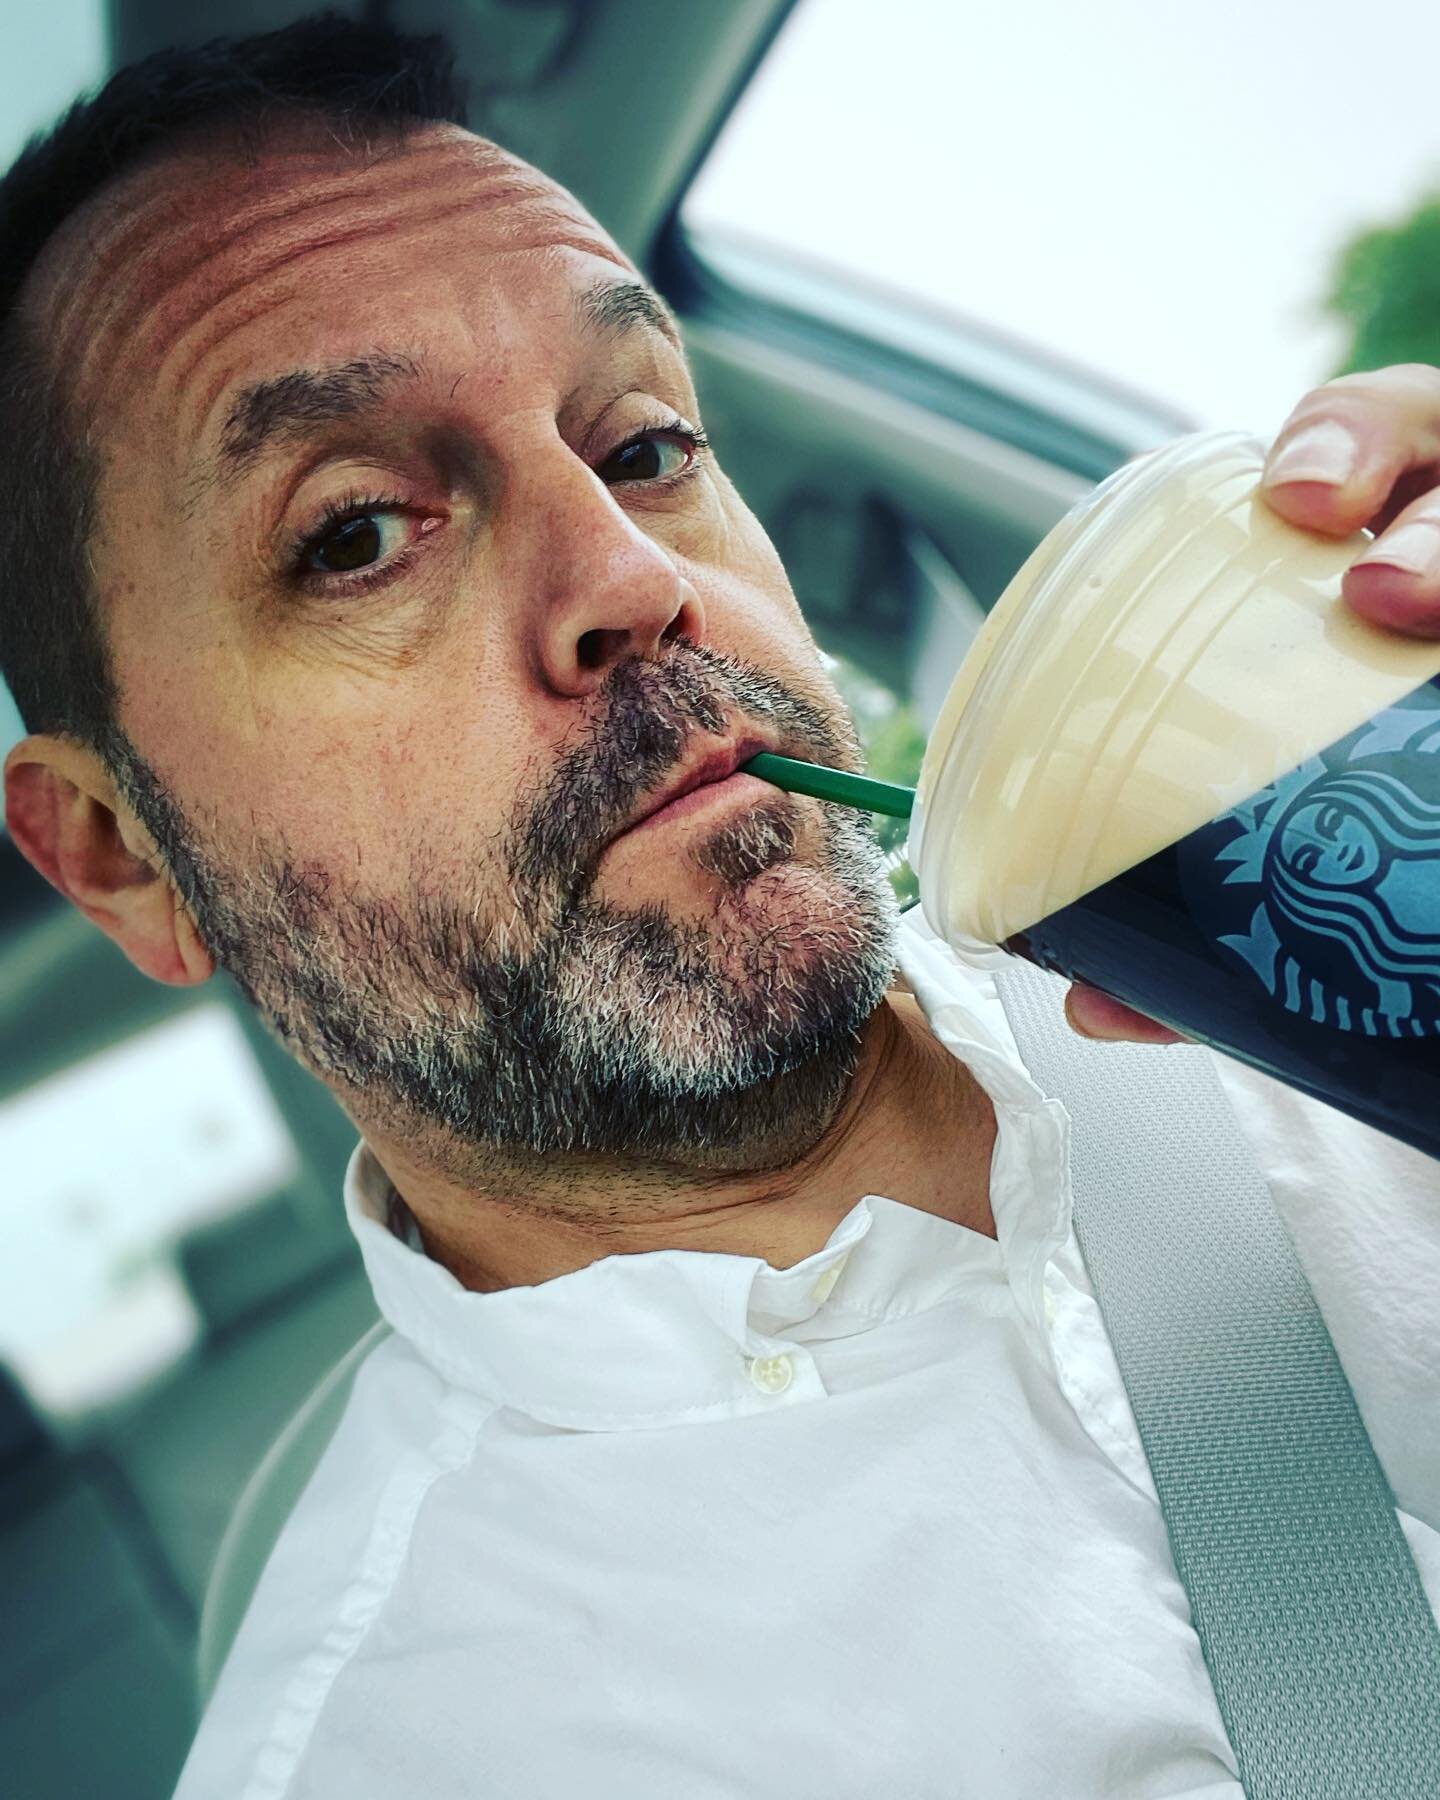 After a market week&hellip;one still needs their nitro cold brew in the morning while running errands! #aereed #ae3theagency #lifewithae #lwae #aeabouttown @rowefinefurniture